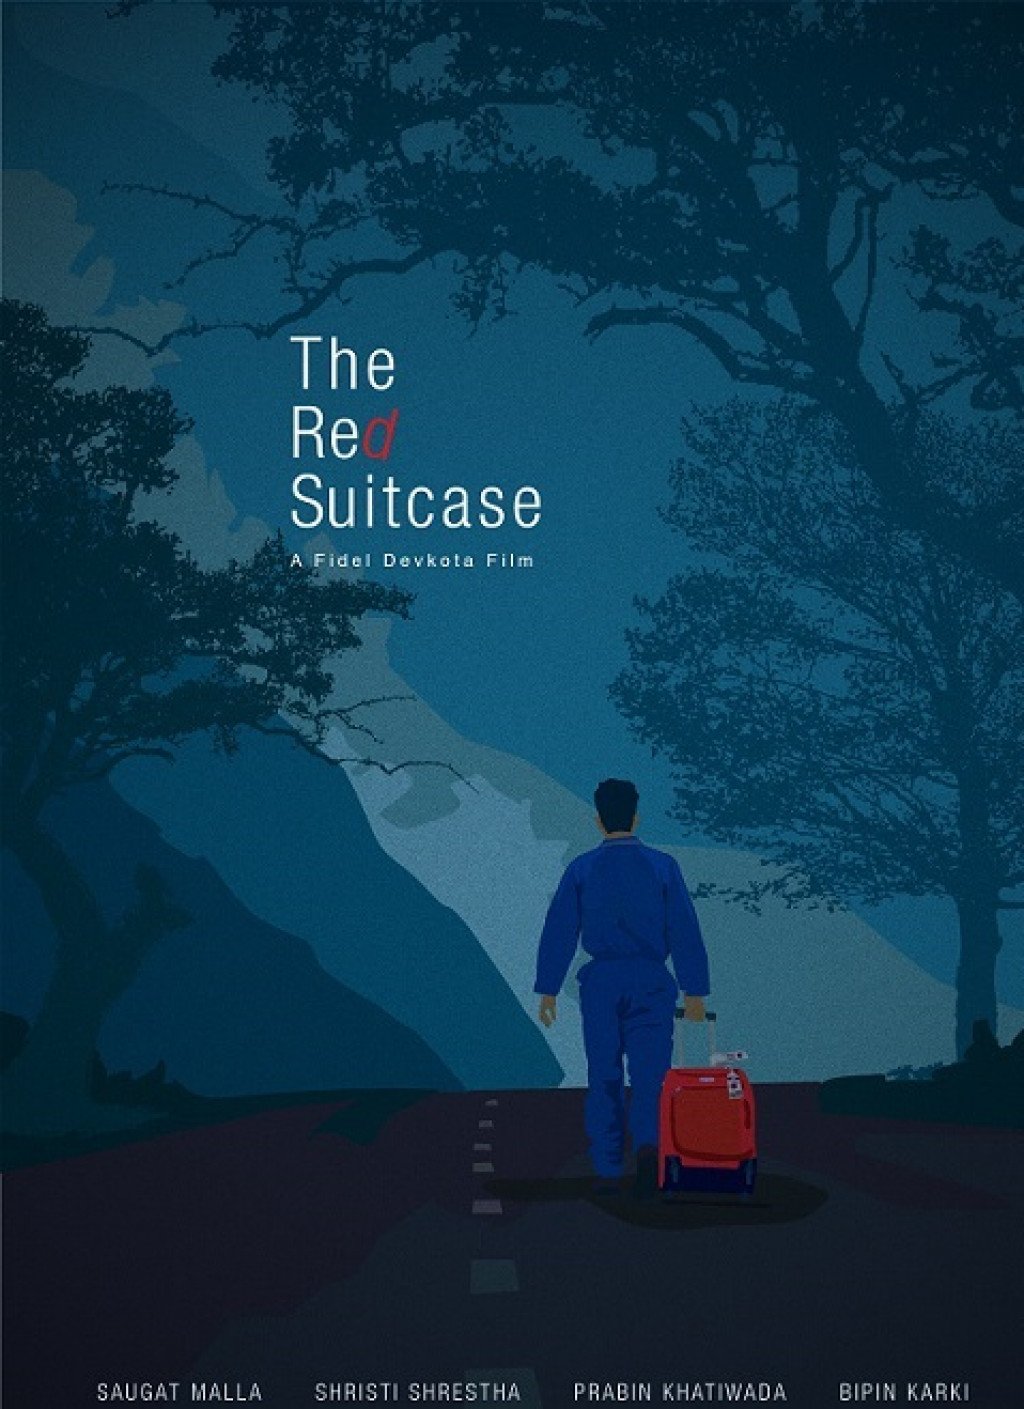 'The Red Suitcase' selected for 80th edition of Venice Film Festival